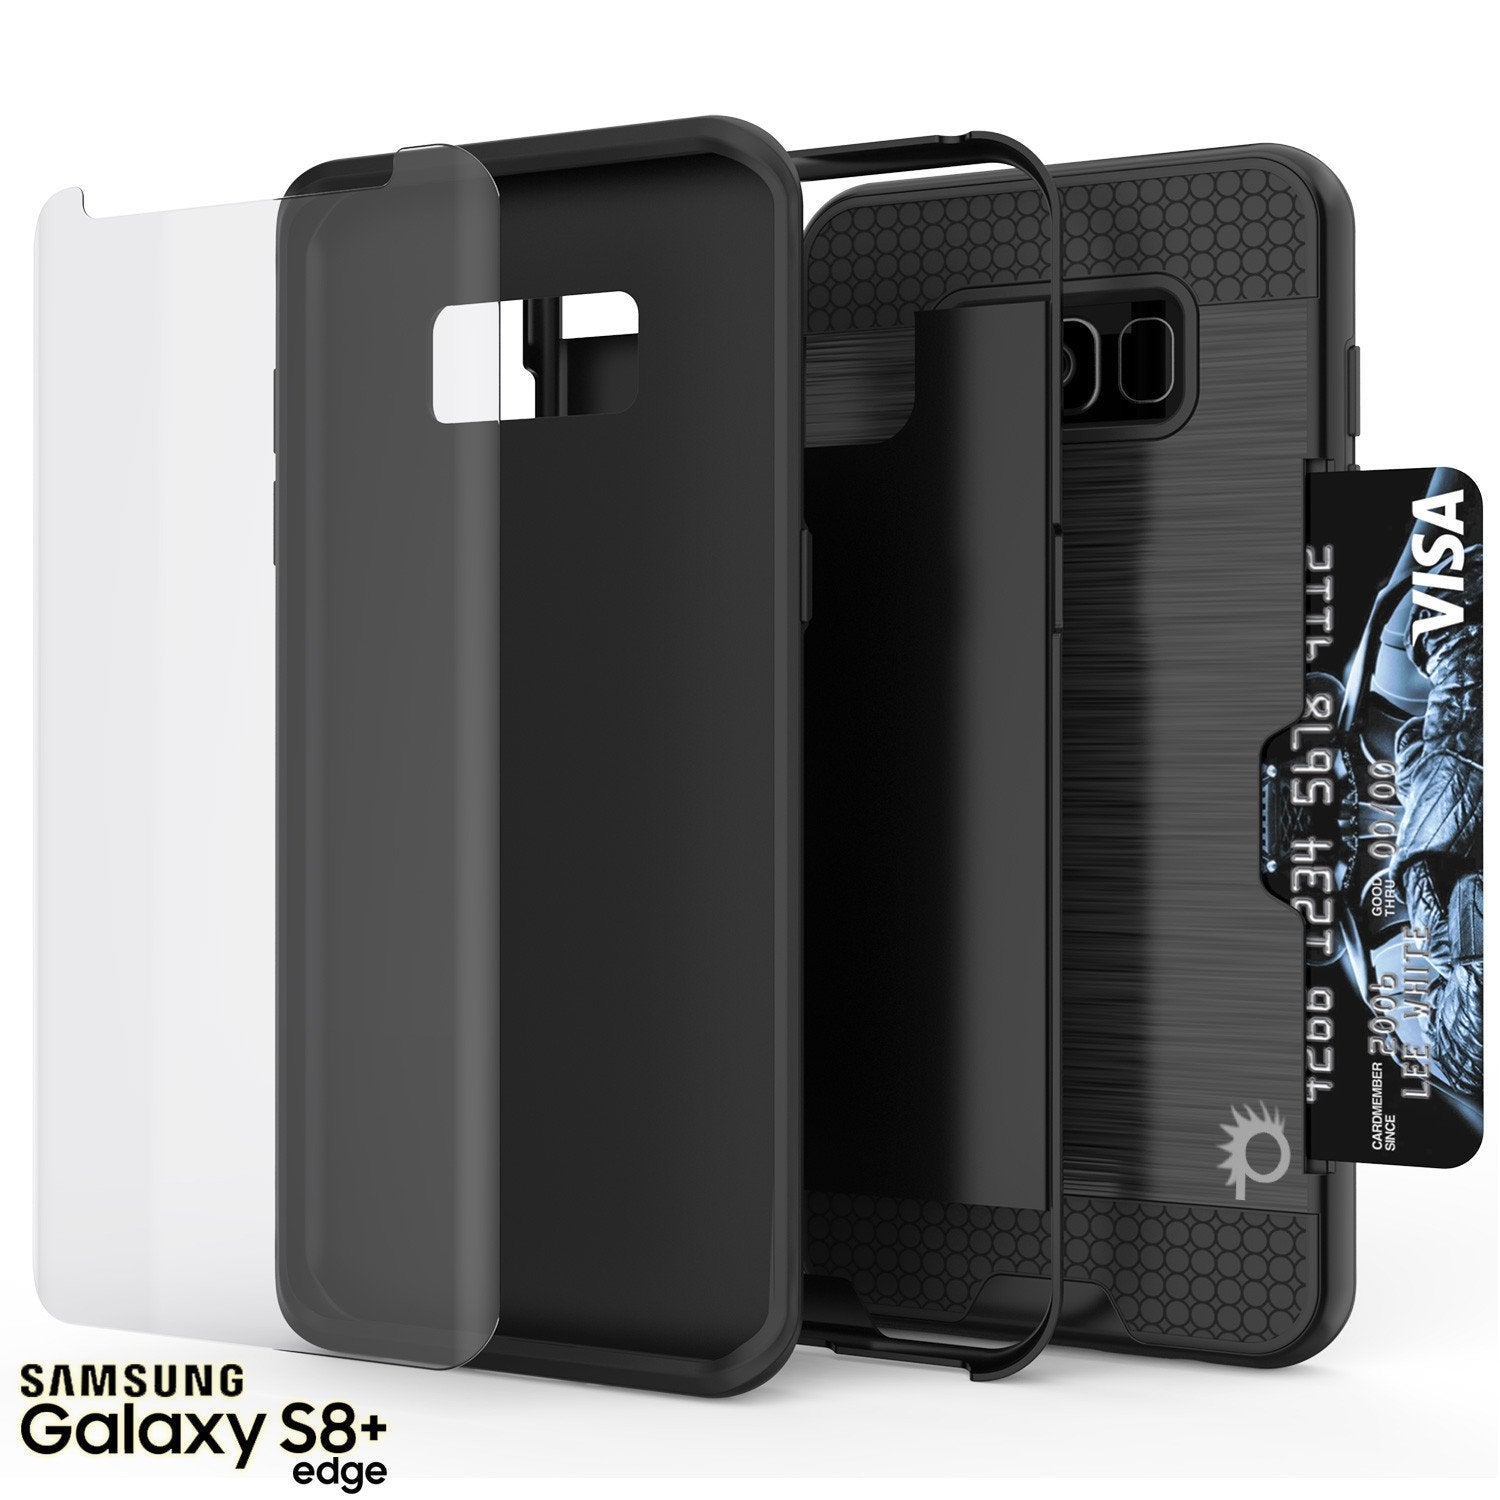 Galaxy S8 Plus Case, PUNKcase [SLOT Series] [Slim Fit] Dual-Layer Armor Cover w/Integrated Anti-Shock System, Credit Card Slot & PunkShield Screen Protector for Samsung Galaxy S8+ [Black] - PunkCase NZ